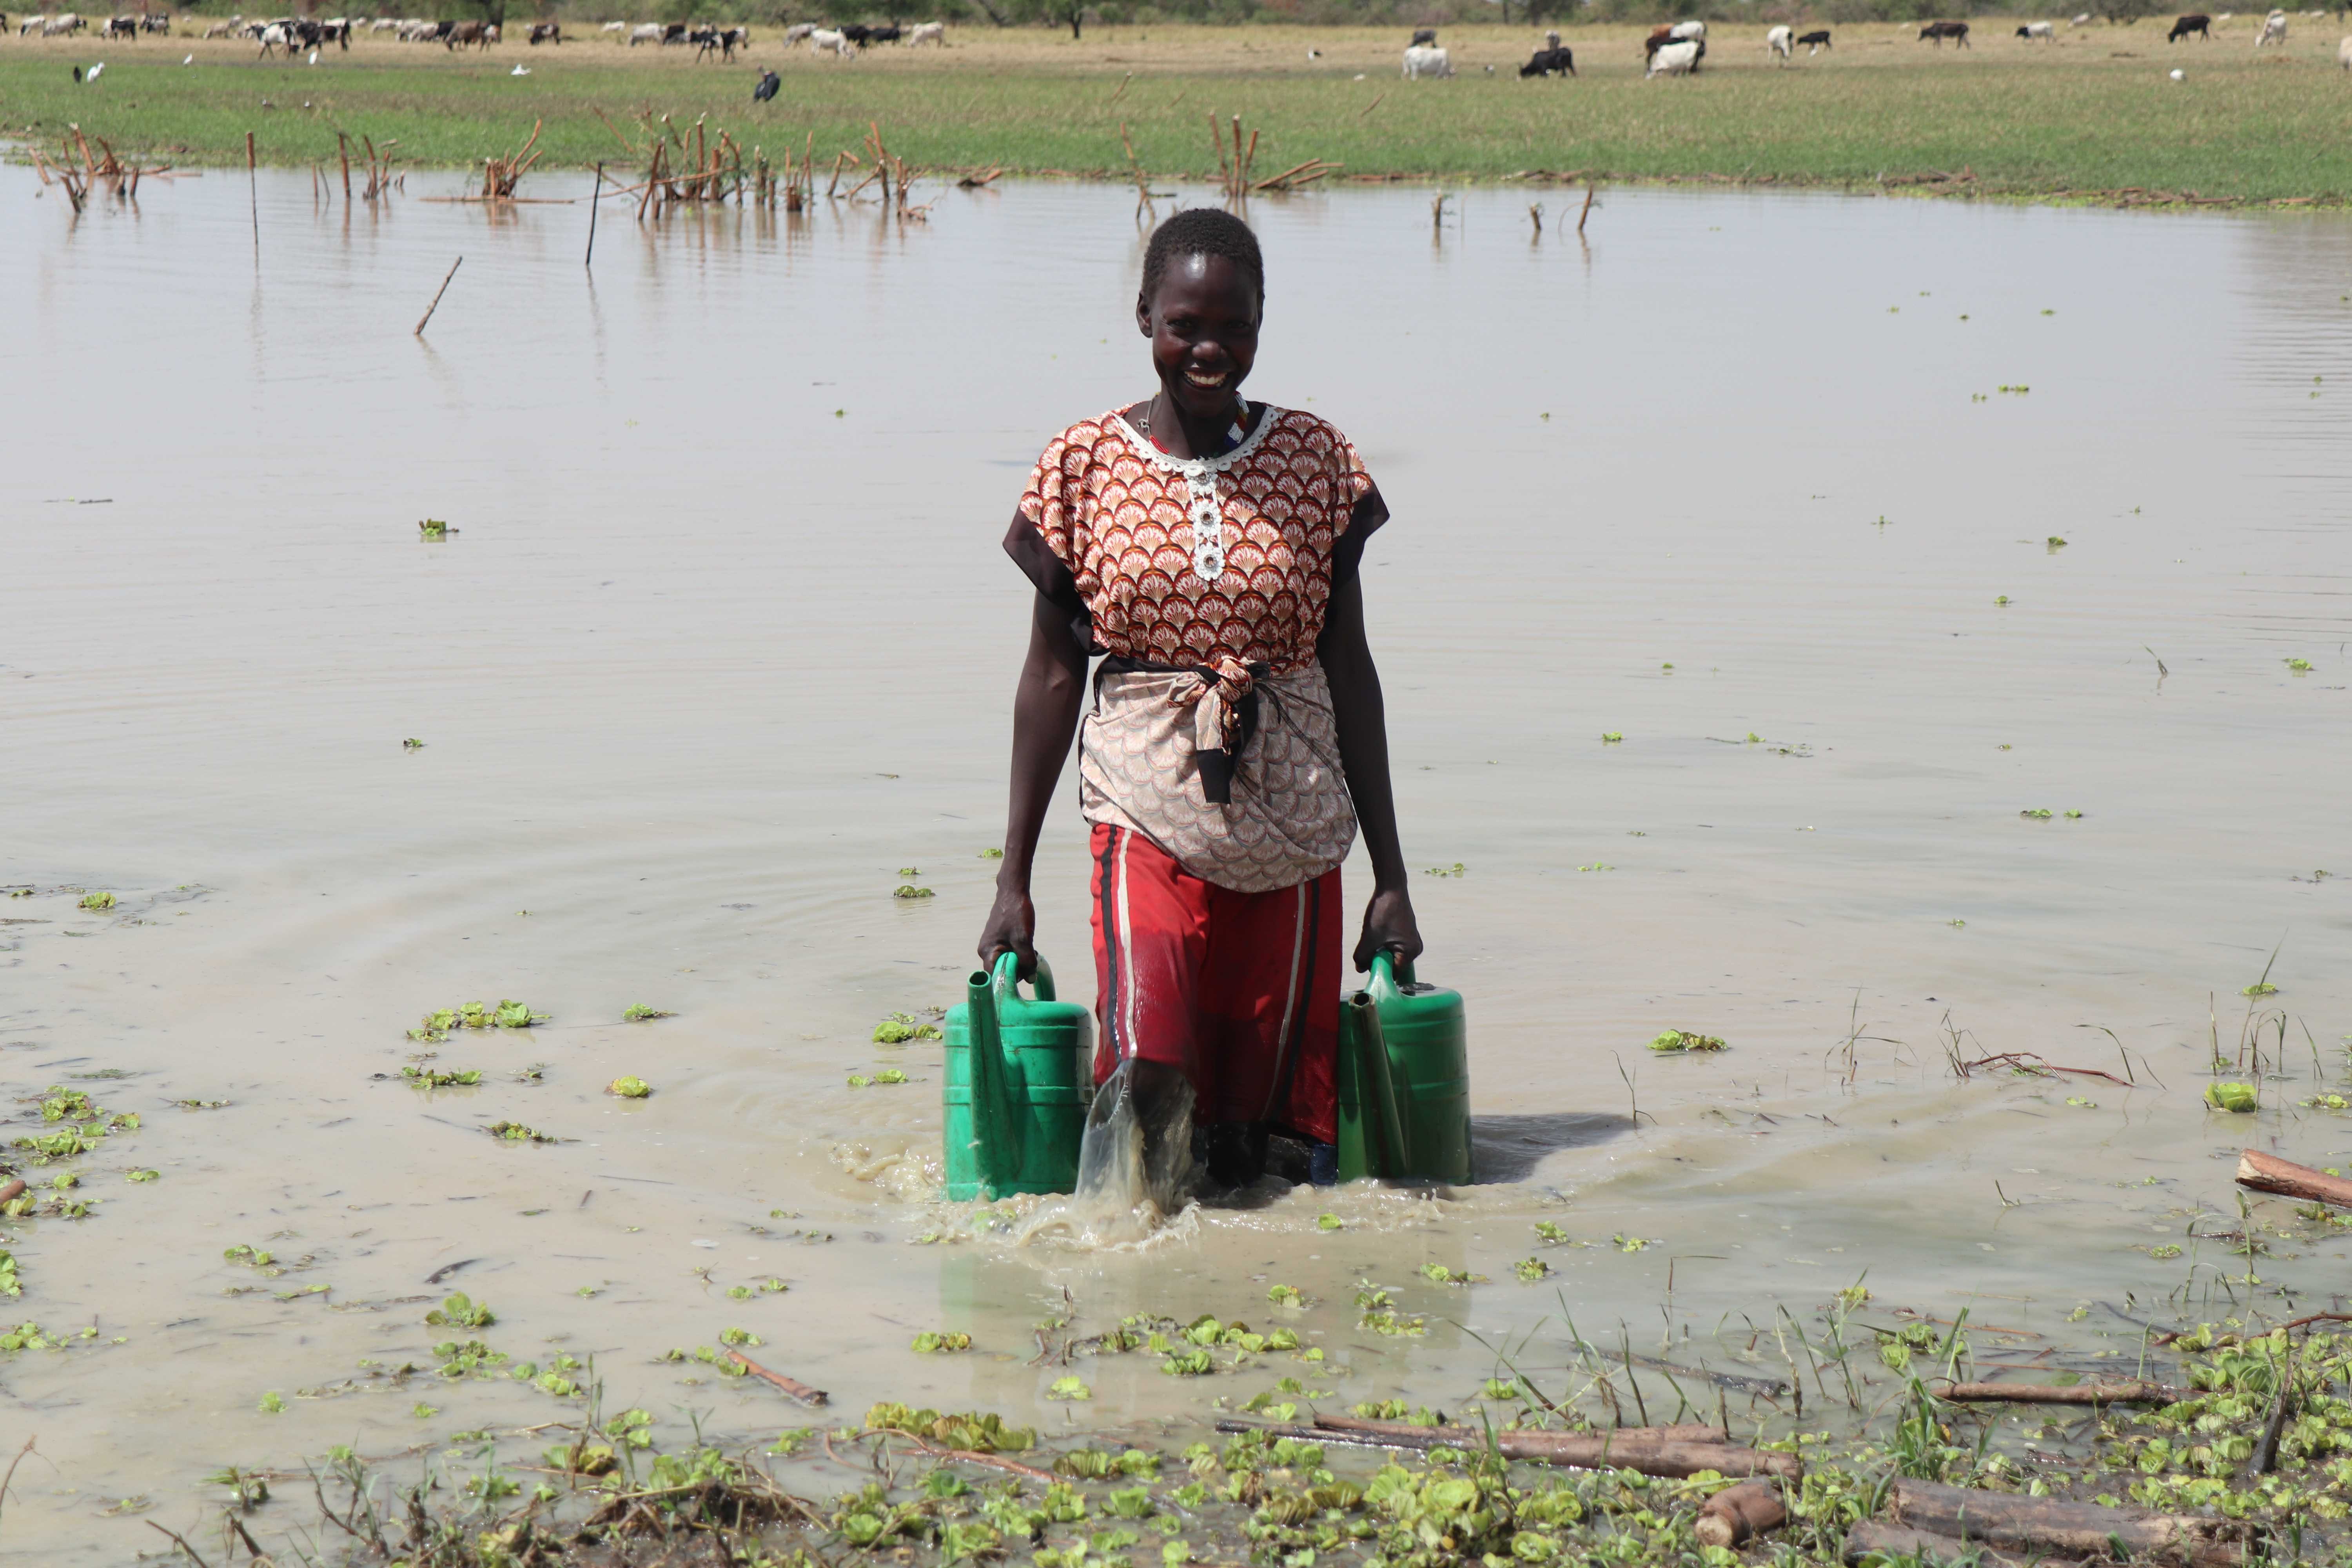 Ator collects buckets of water to irrigate her village's farm